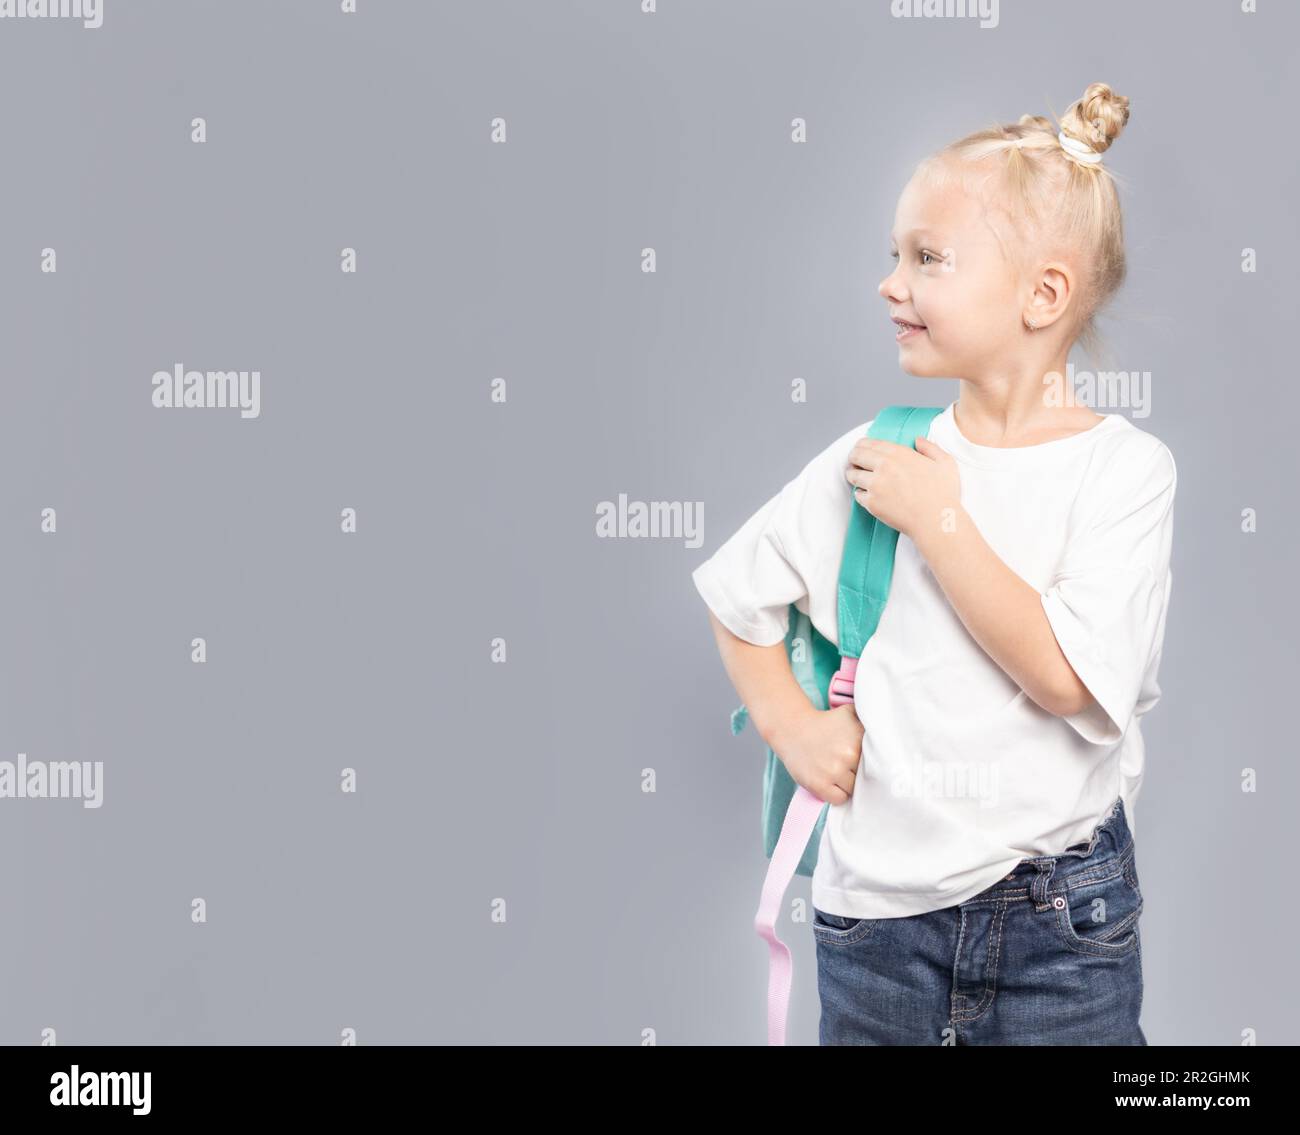 Elementary school girl with blond hair and messy buns, holding backpack and dressed in white t-shirt looking sideways on grey background Stock Photo